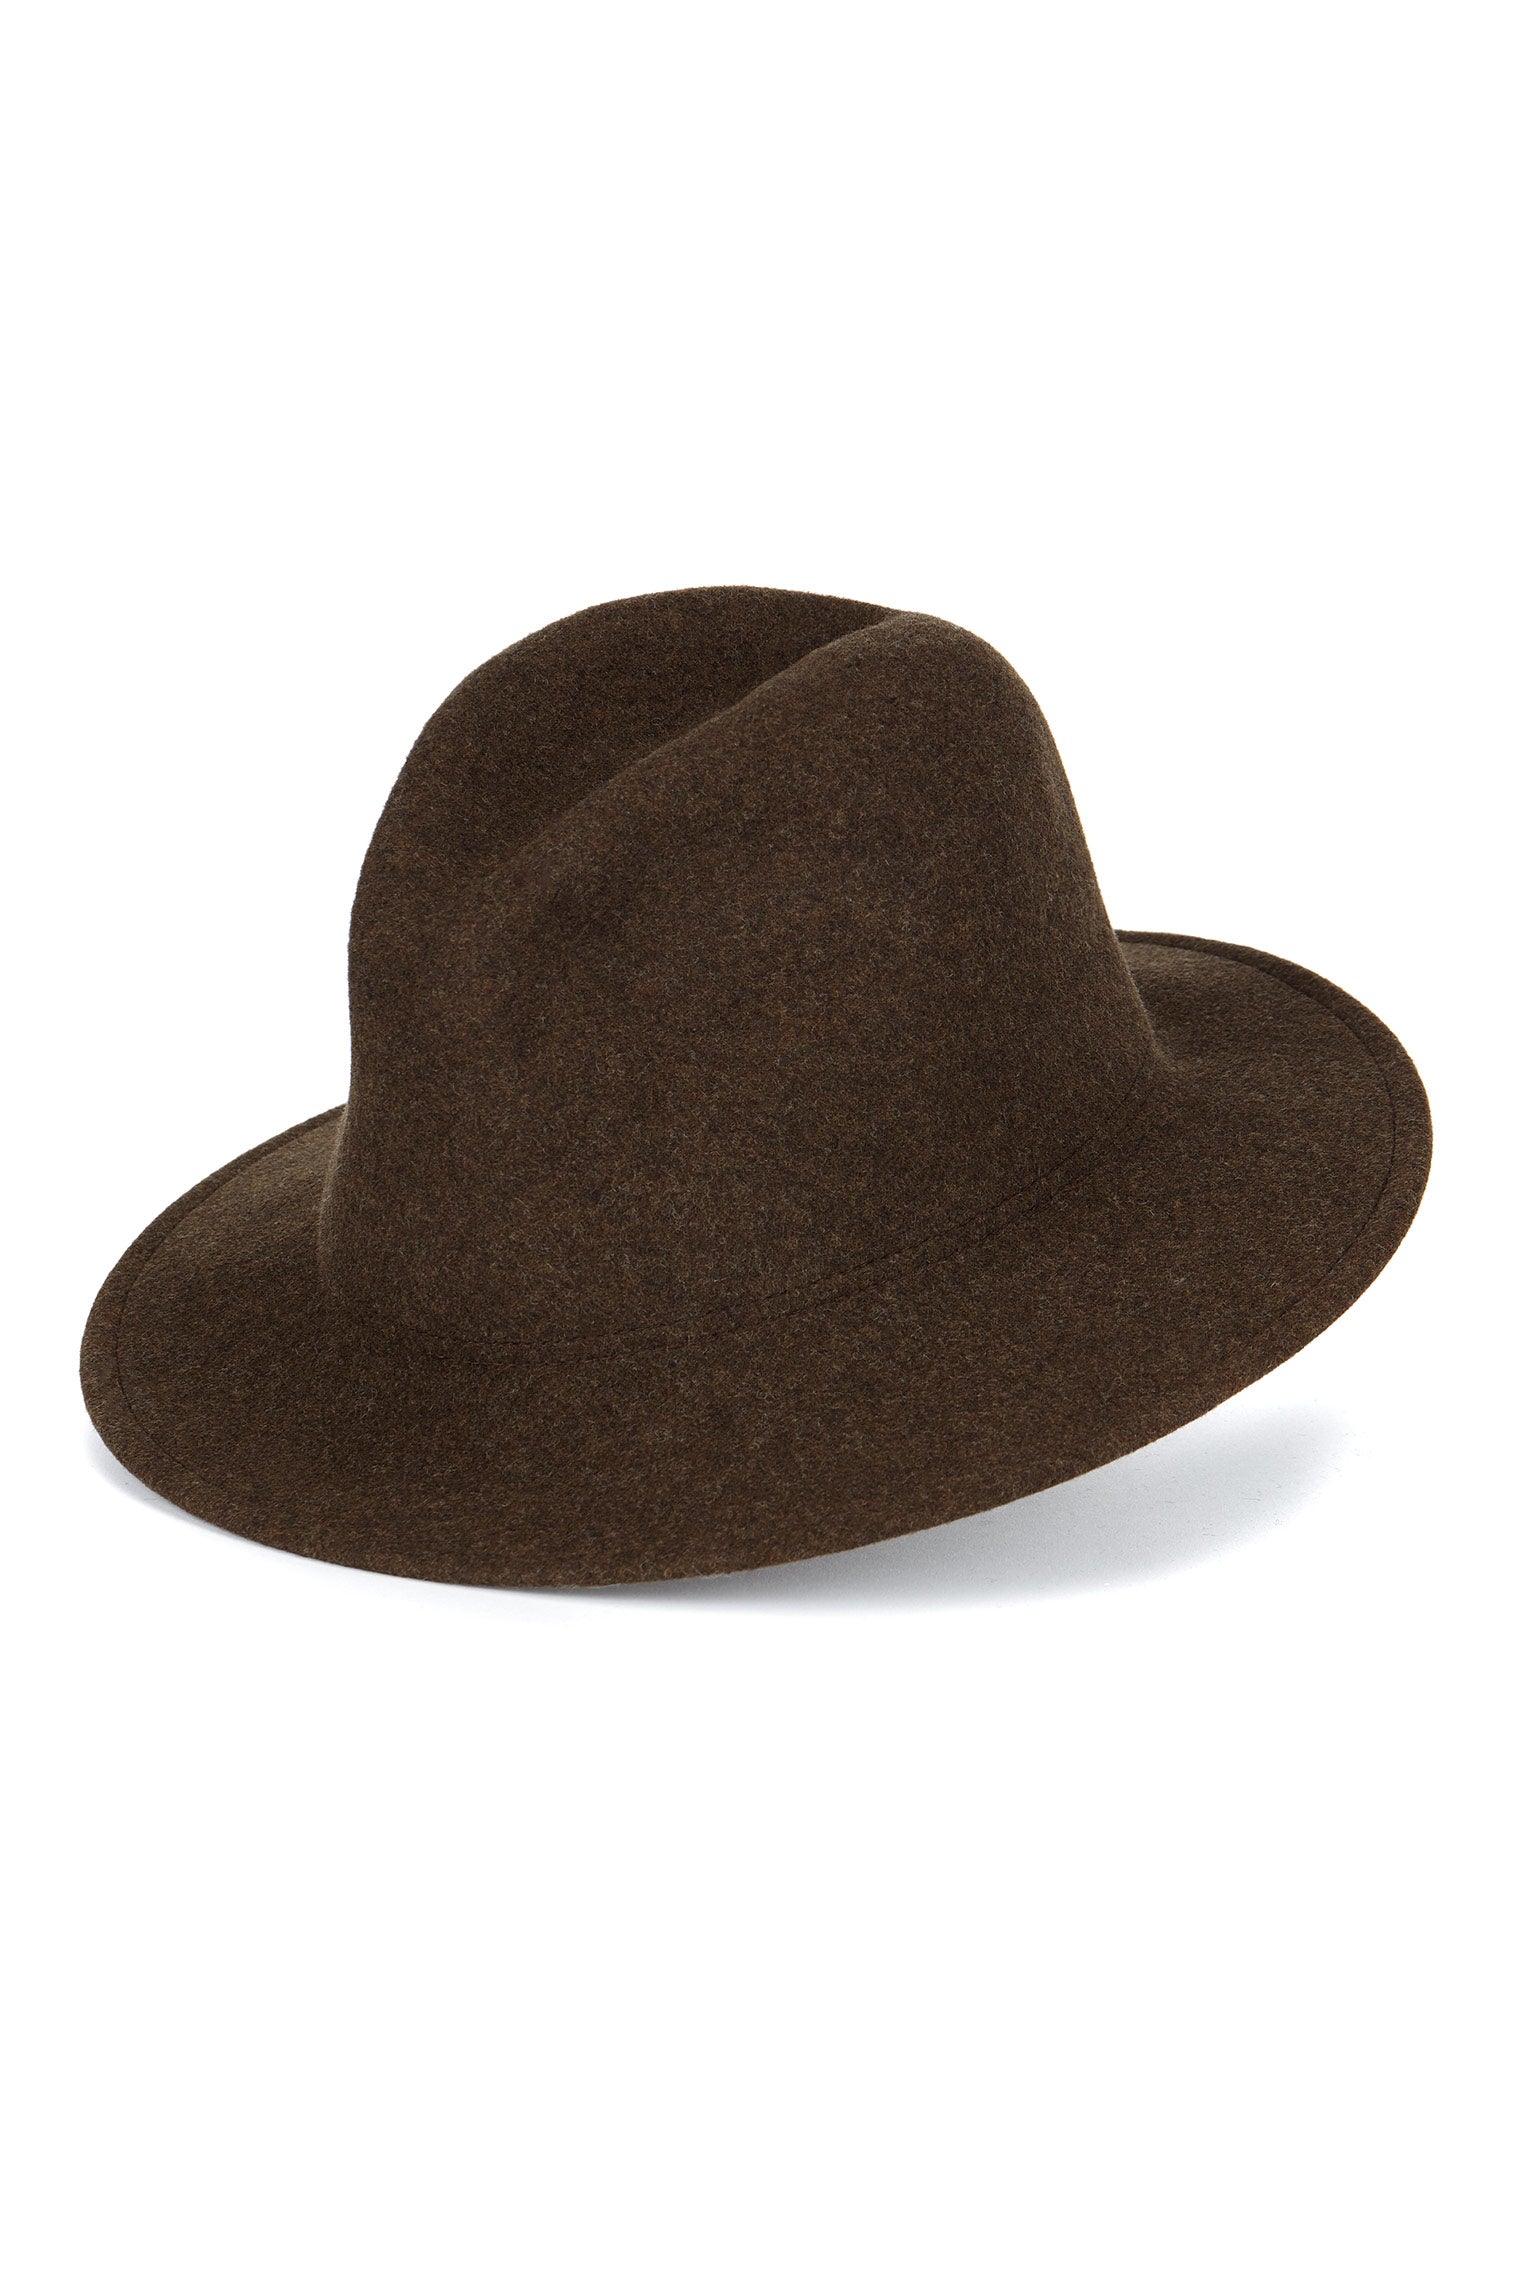 Rambler Rollable Trilby - Hats for Tall People - Lock & Co. Hatters London UK